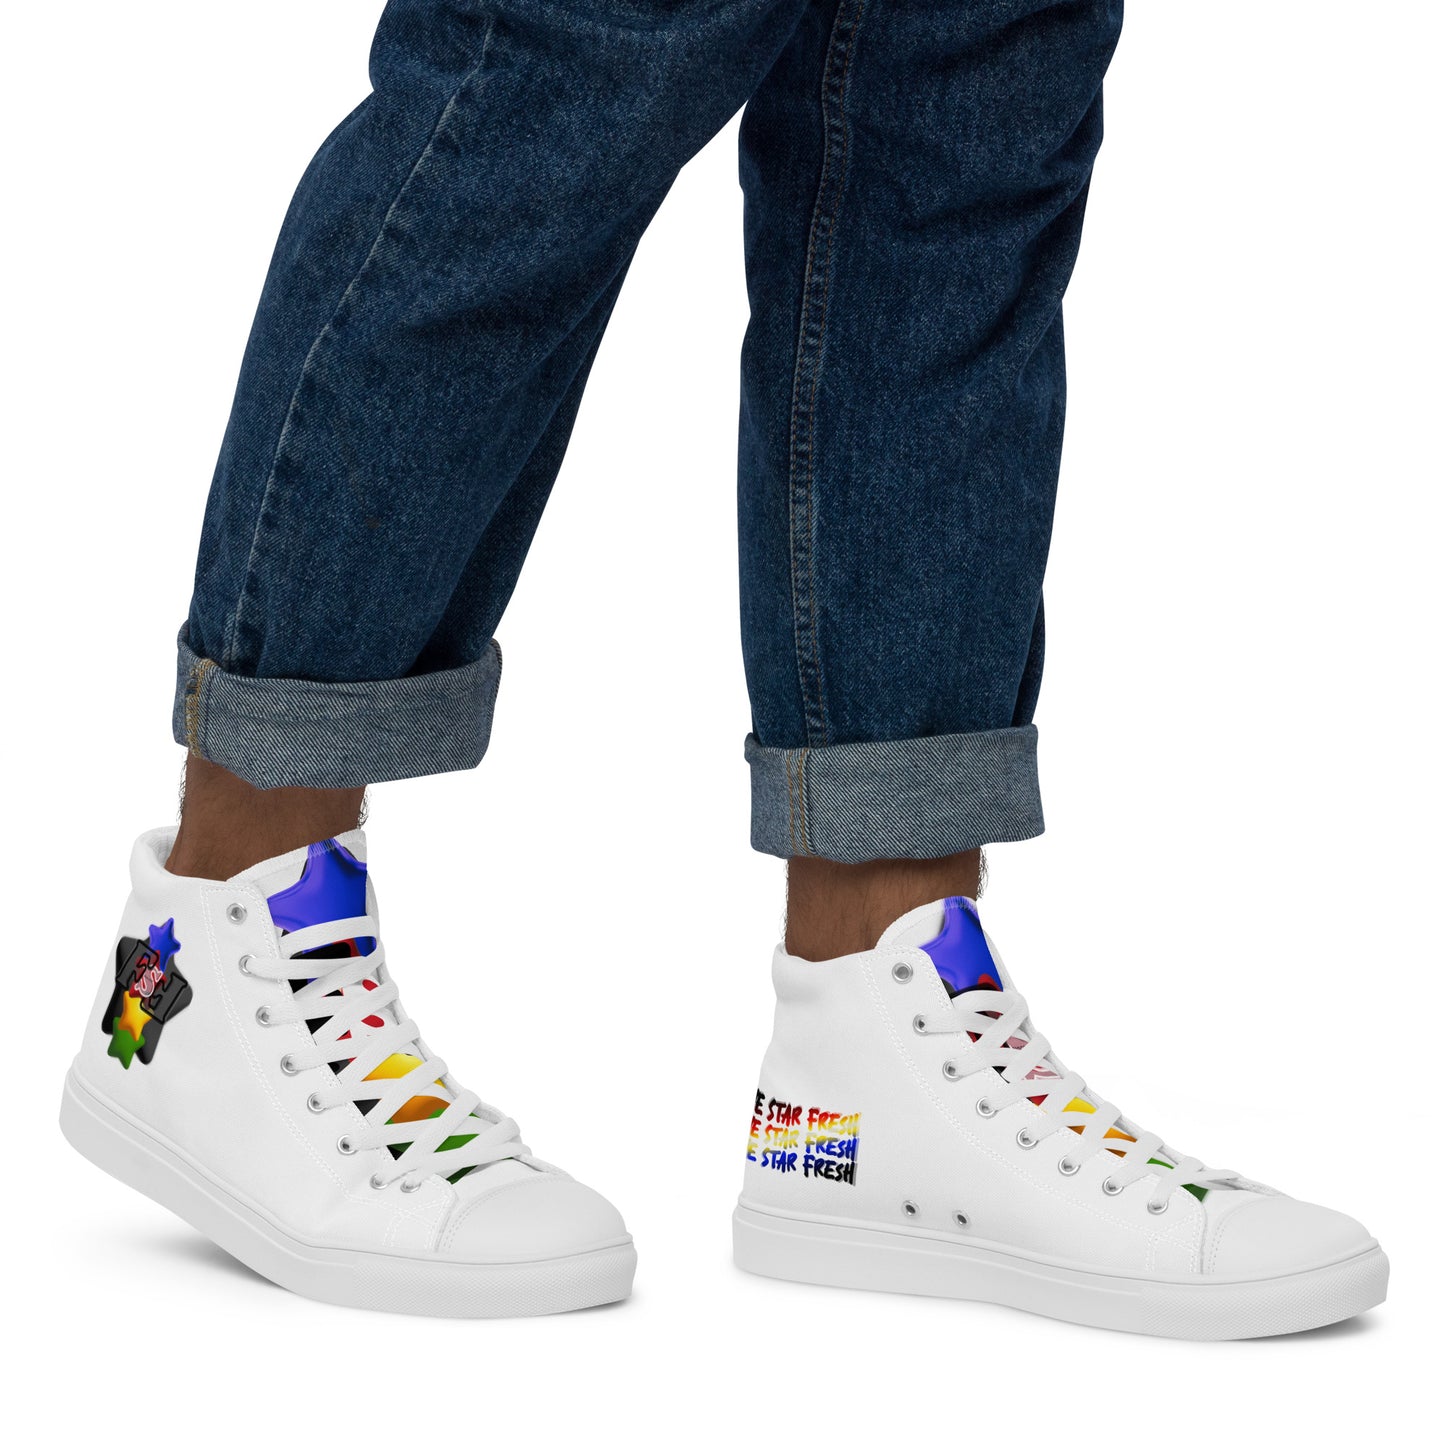 Men’s high top canvas shoes - FSF Stacked 'Black Star' White